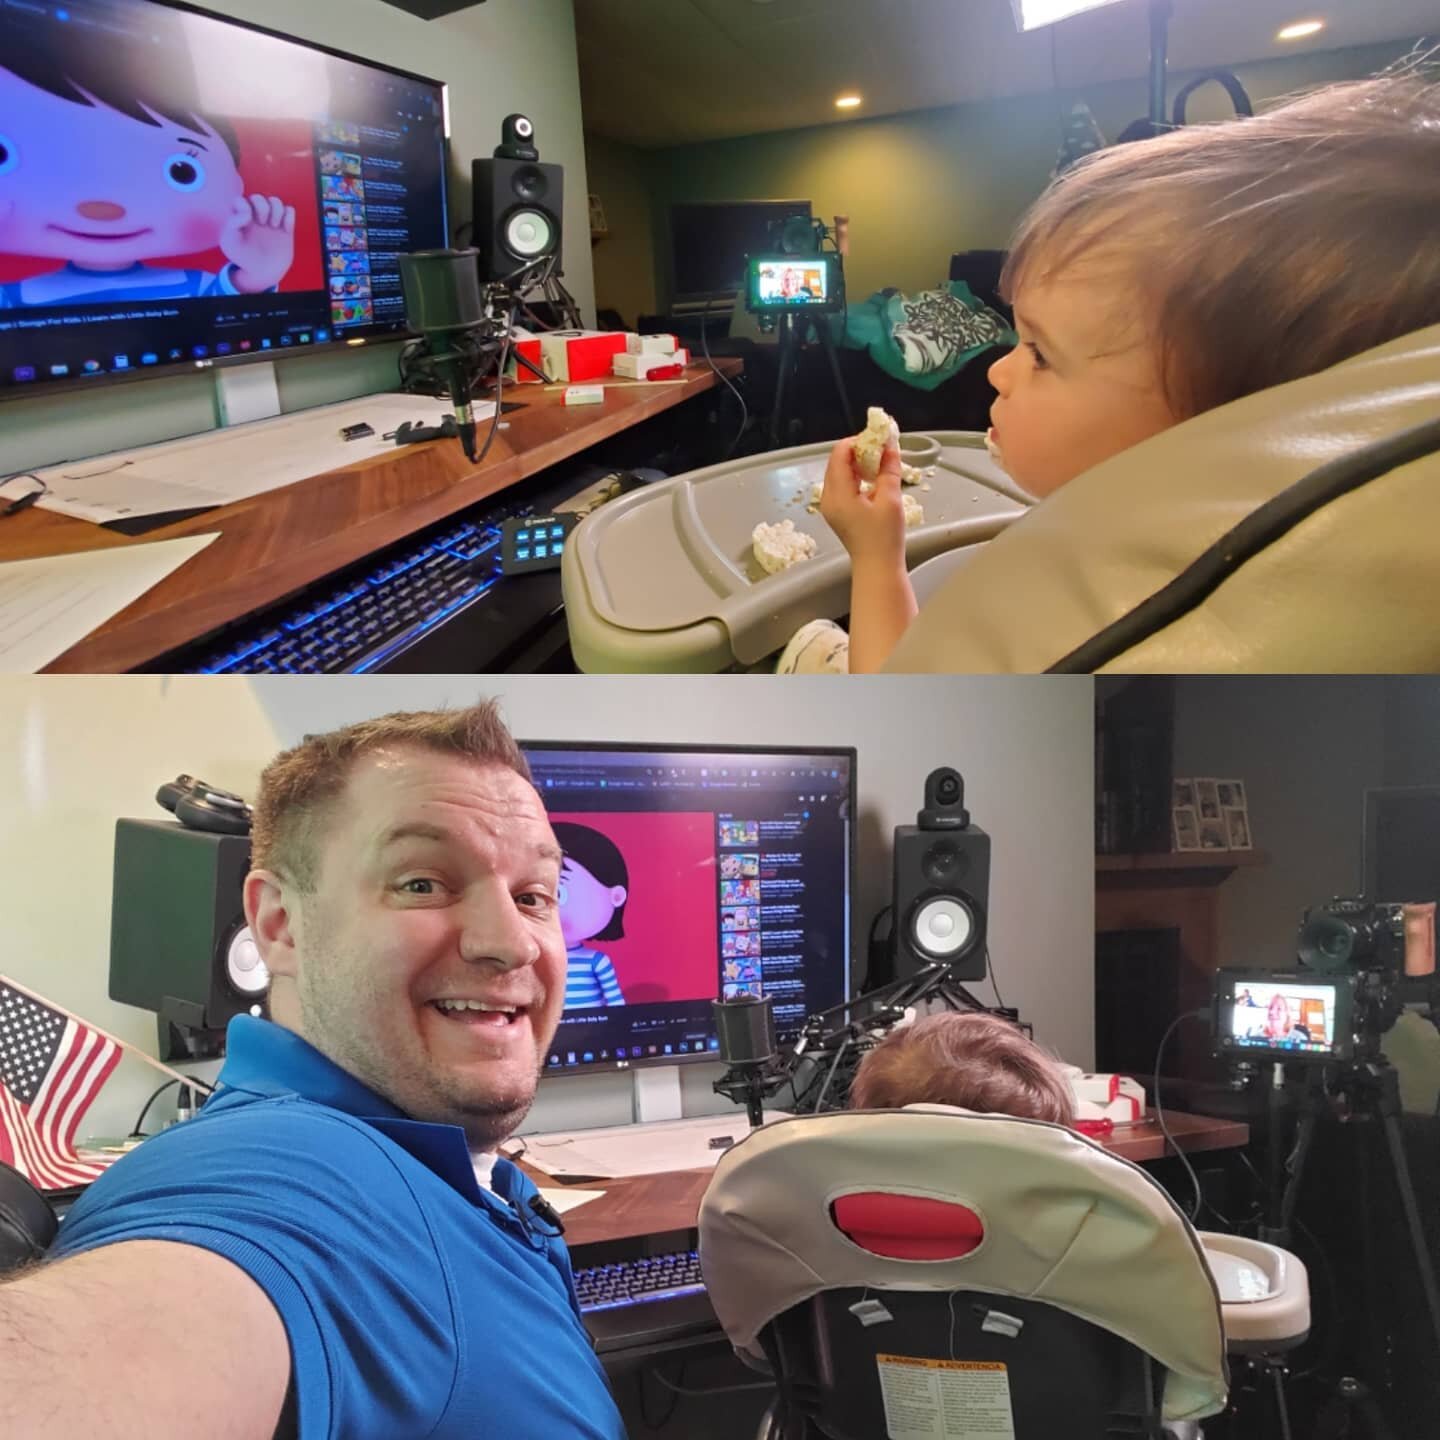 Look at my hardworking assist editor; taking a meeting on her lunch break.
#zoommeeting #dadlife #VideoCallTips